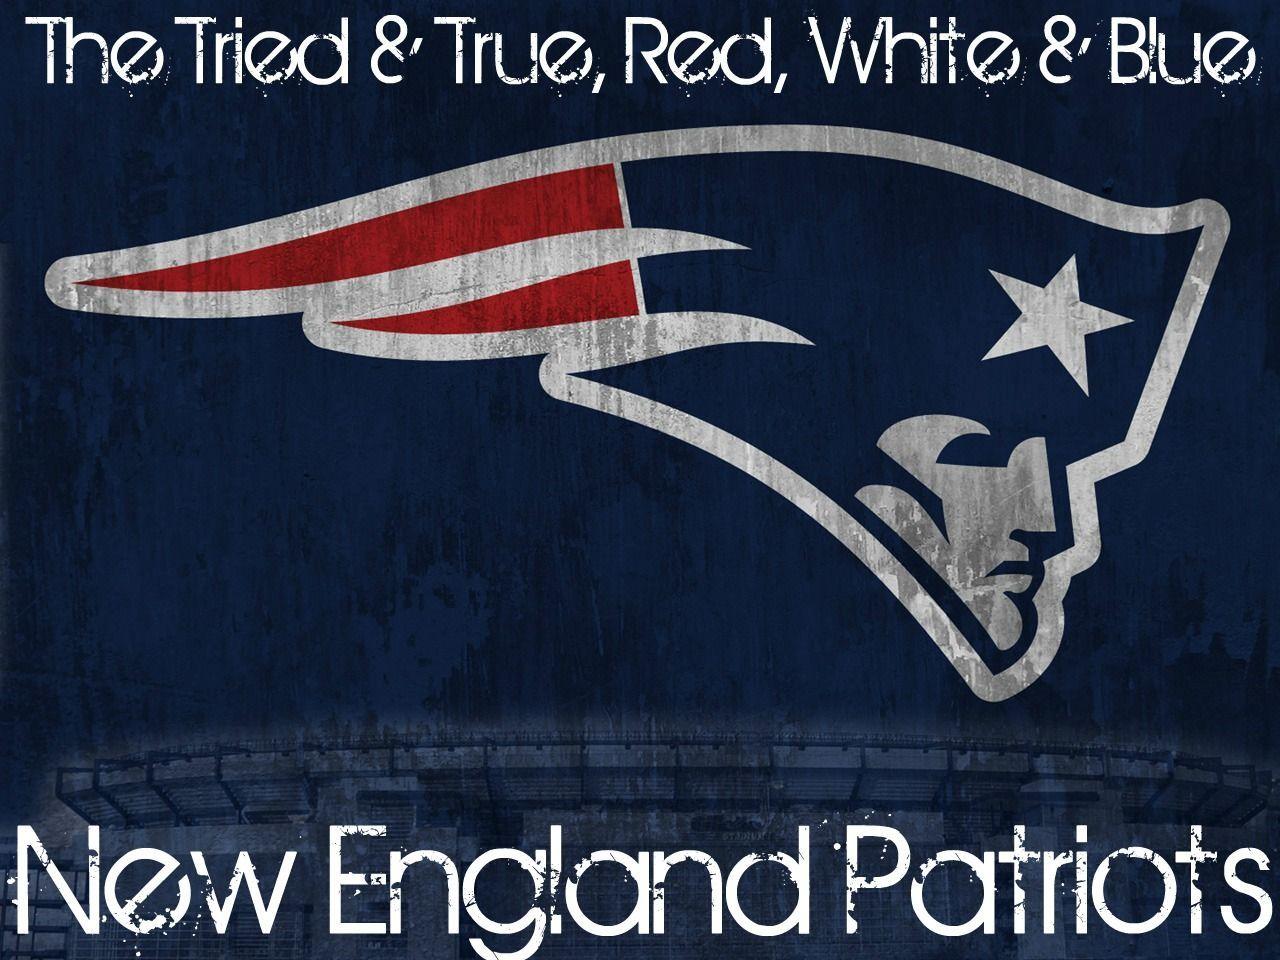 Red White and Blue Patriot Logo - The Tried & True, Red, White & Blue. #Patriots. Patriots Graphics